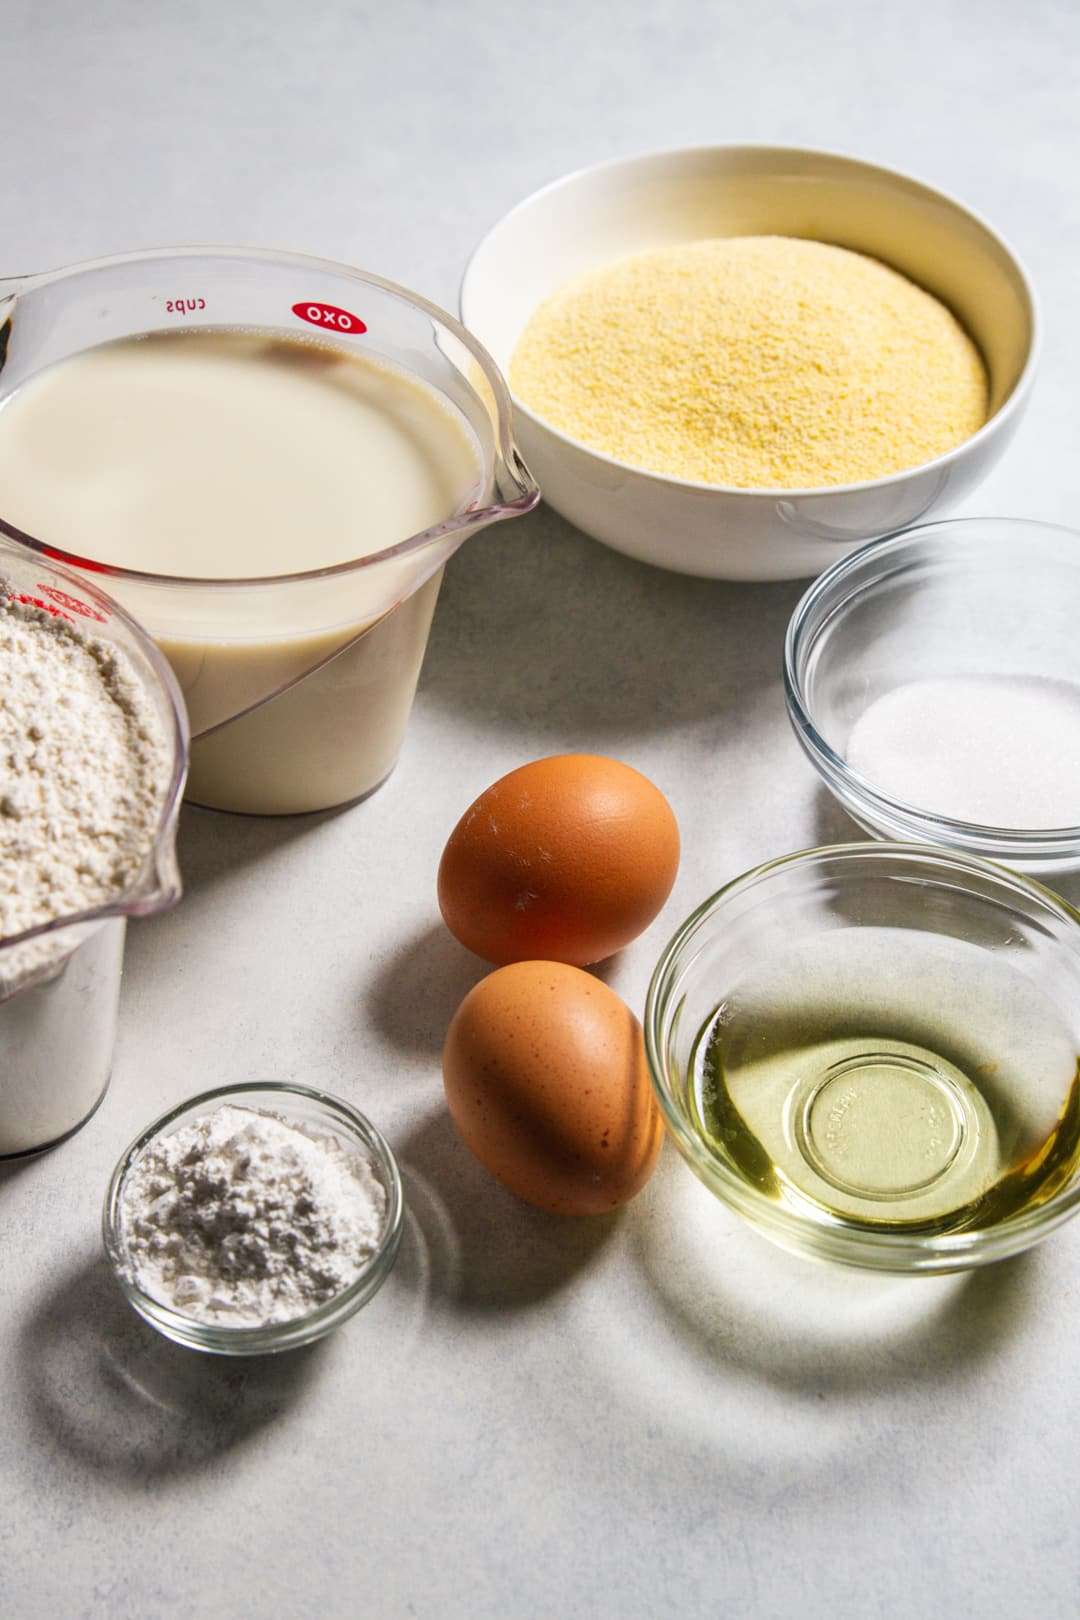 Ingredients for cornmeal waffles